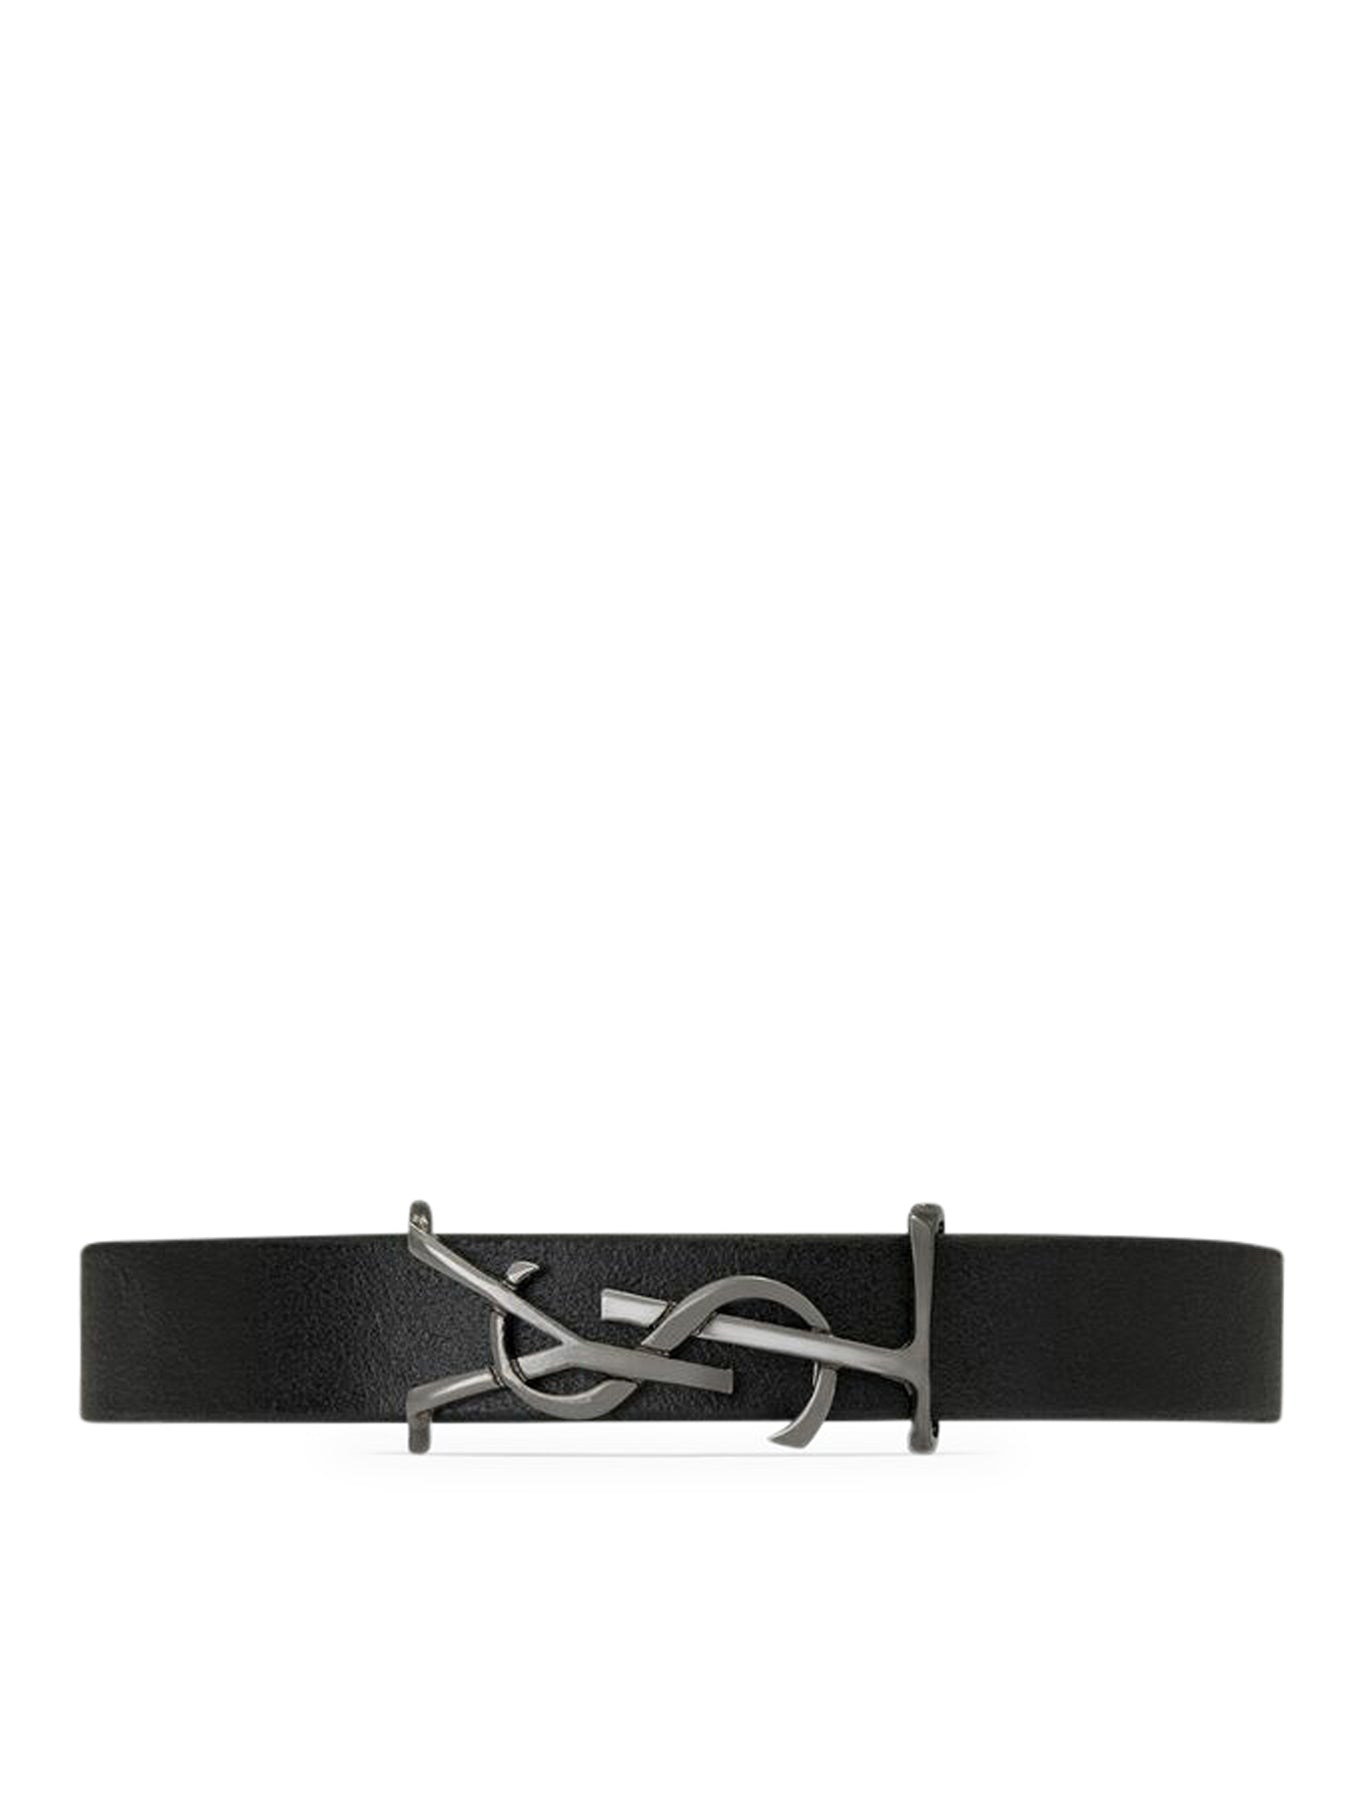 OPYUM BRACELET IN SOFT LEATHER AND METAL